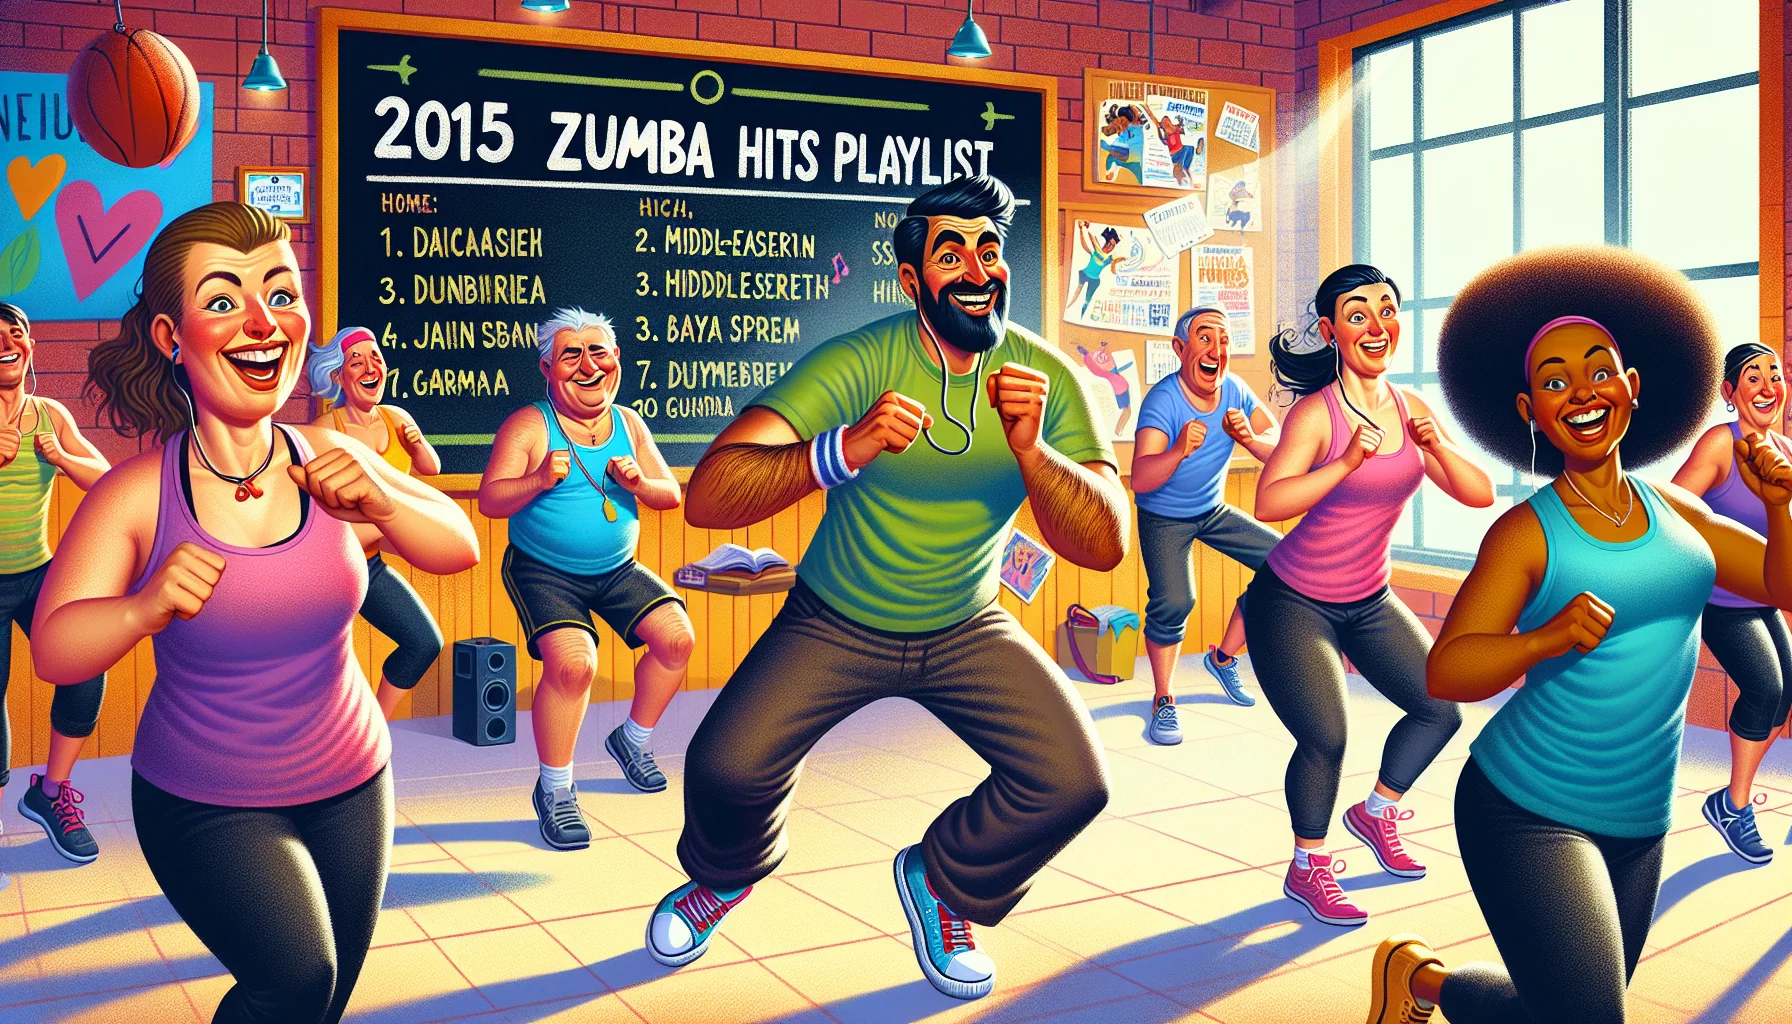 Visualize a humorous scene set in a Zumba dance studio. There's a chalkboard displaying '2015 Zumba Hits PlayList' with some popular dance tracks listed below. Participants with various body types and fitness levels are attempting to follow the steps and rhythms of the Zumba instructor. A Caucasian woman is laughing while trying to catch her breath. A Middle-Eastern man is fumbling but smiling, determined to match the pace. A Hispanic man is executing the steps effortlessly, exuding enthusiasm. The room is brightly lit, and you can feel the energy and fun atmosphere.